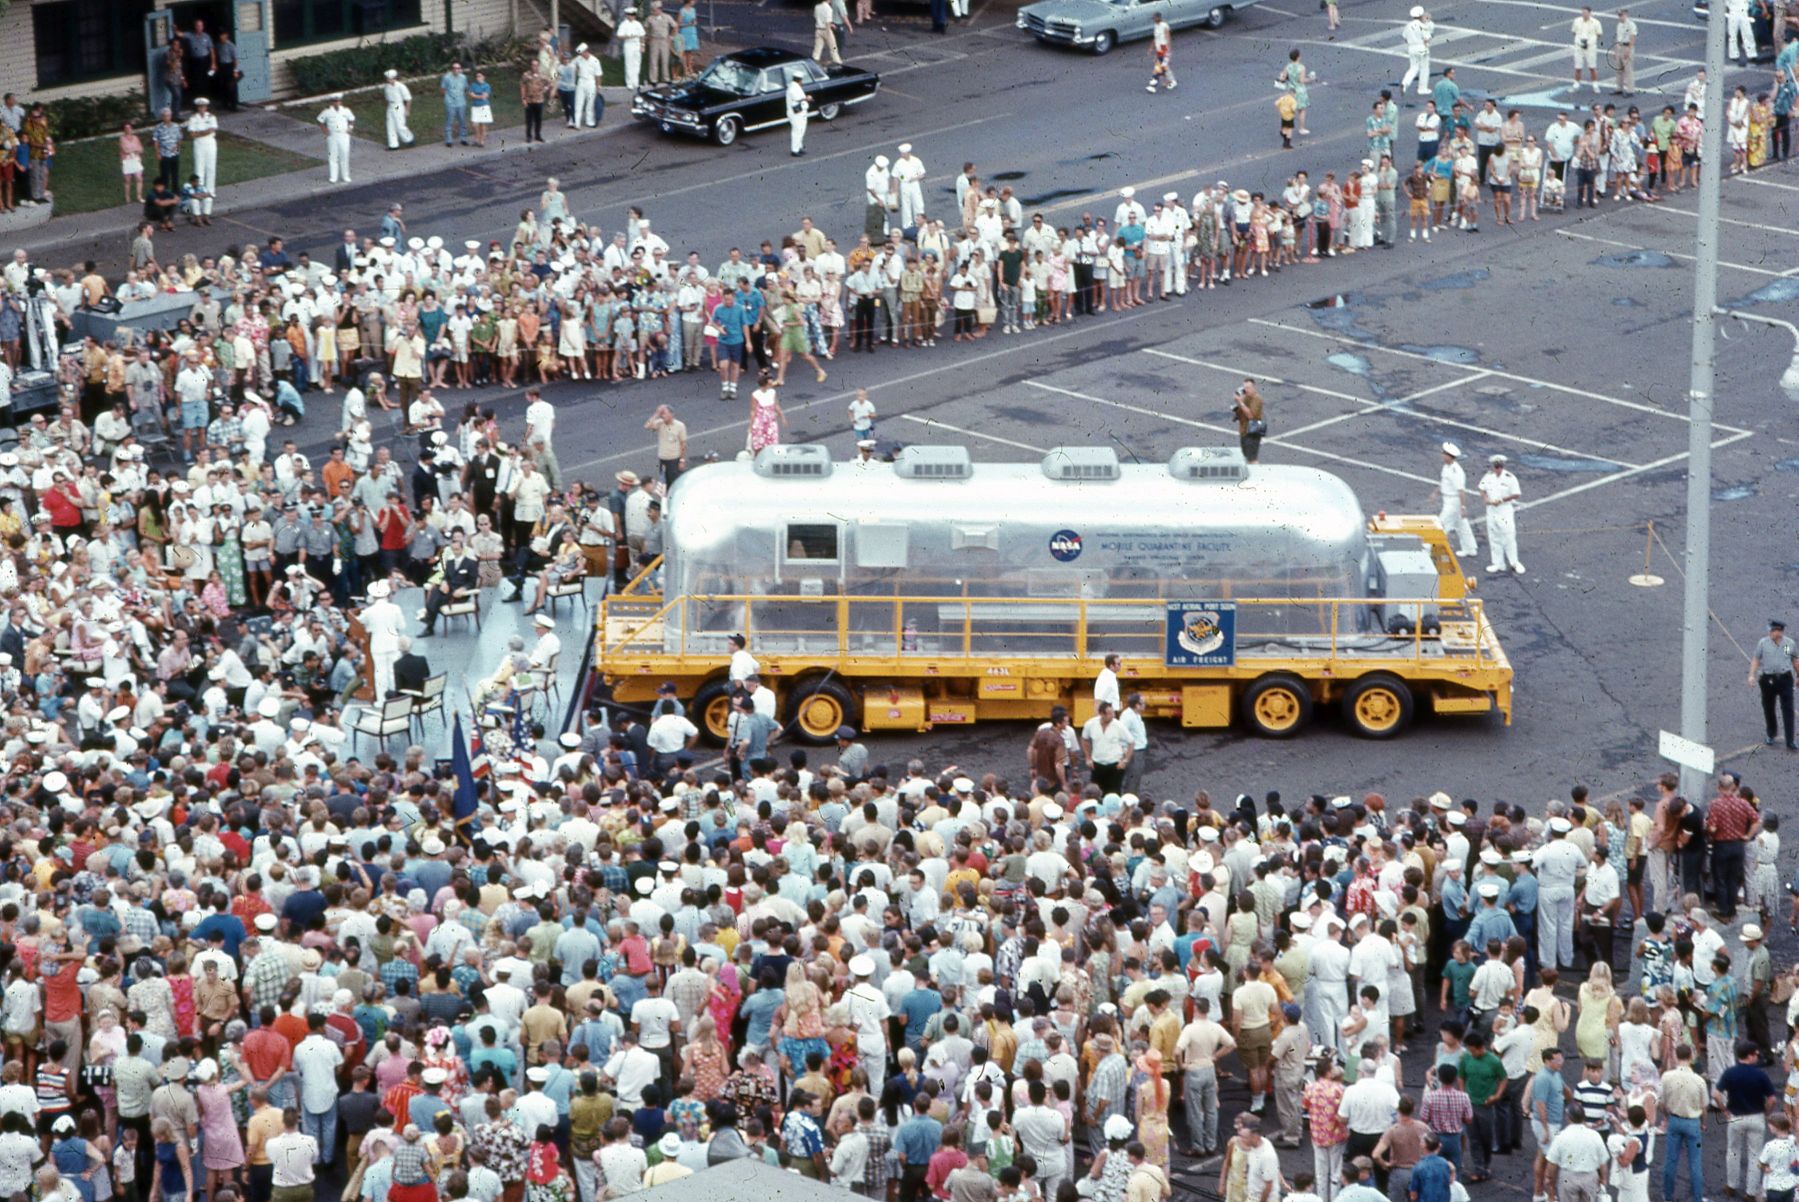 A large welcome celebration for the Apollo 11 astronauts